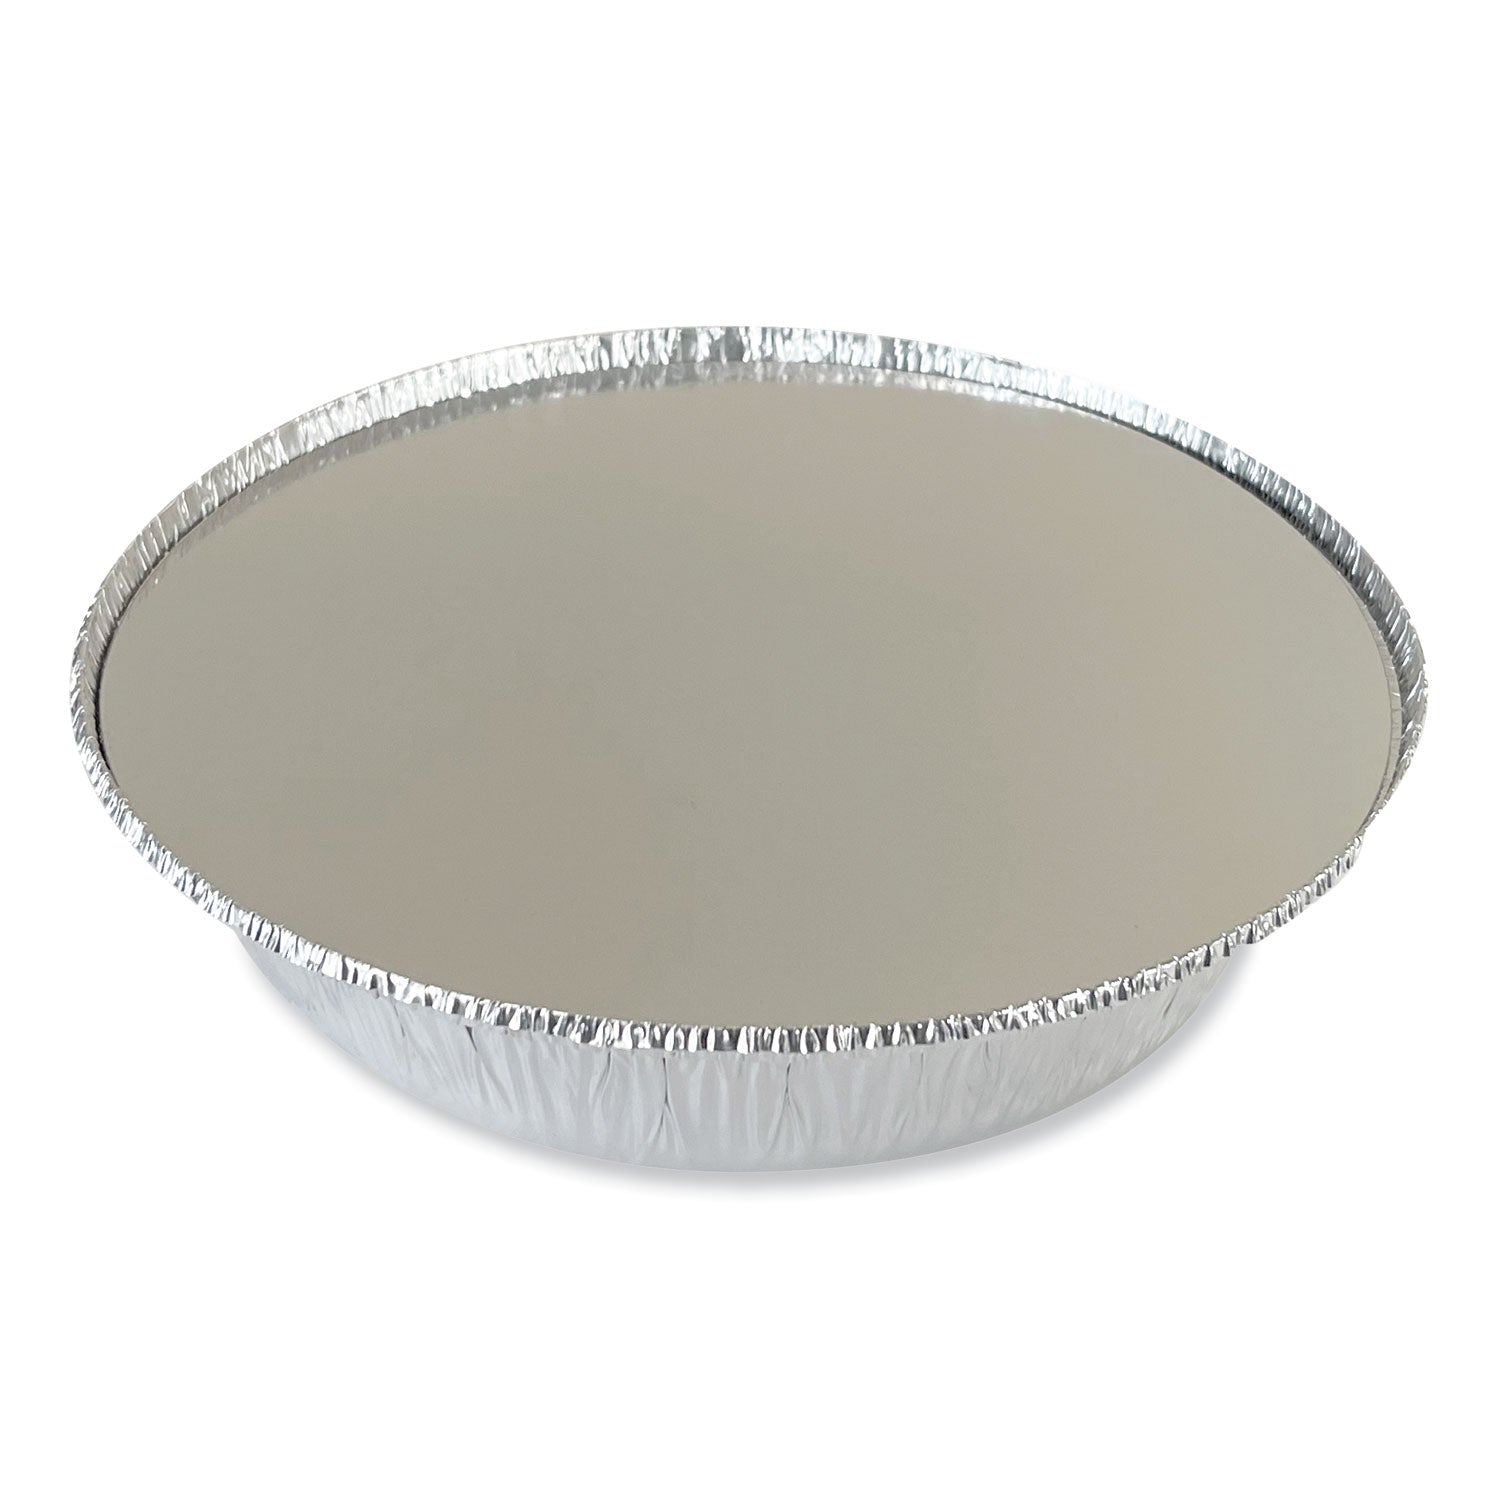 round-aluminum-to-go-containers-with-lid-48-oz-9-diameter-x-166h-silver-200-carton_bwkround9combo - 3